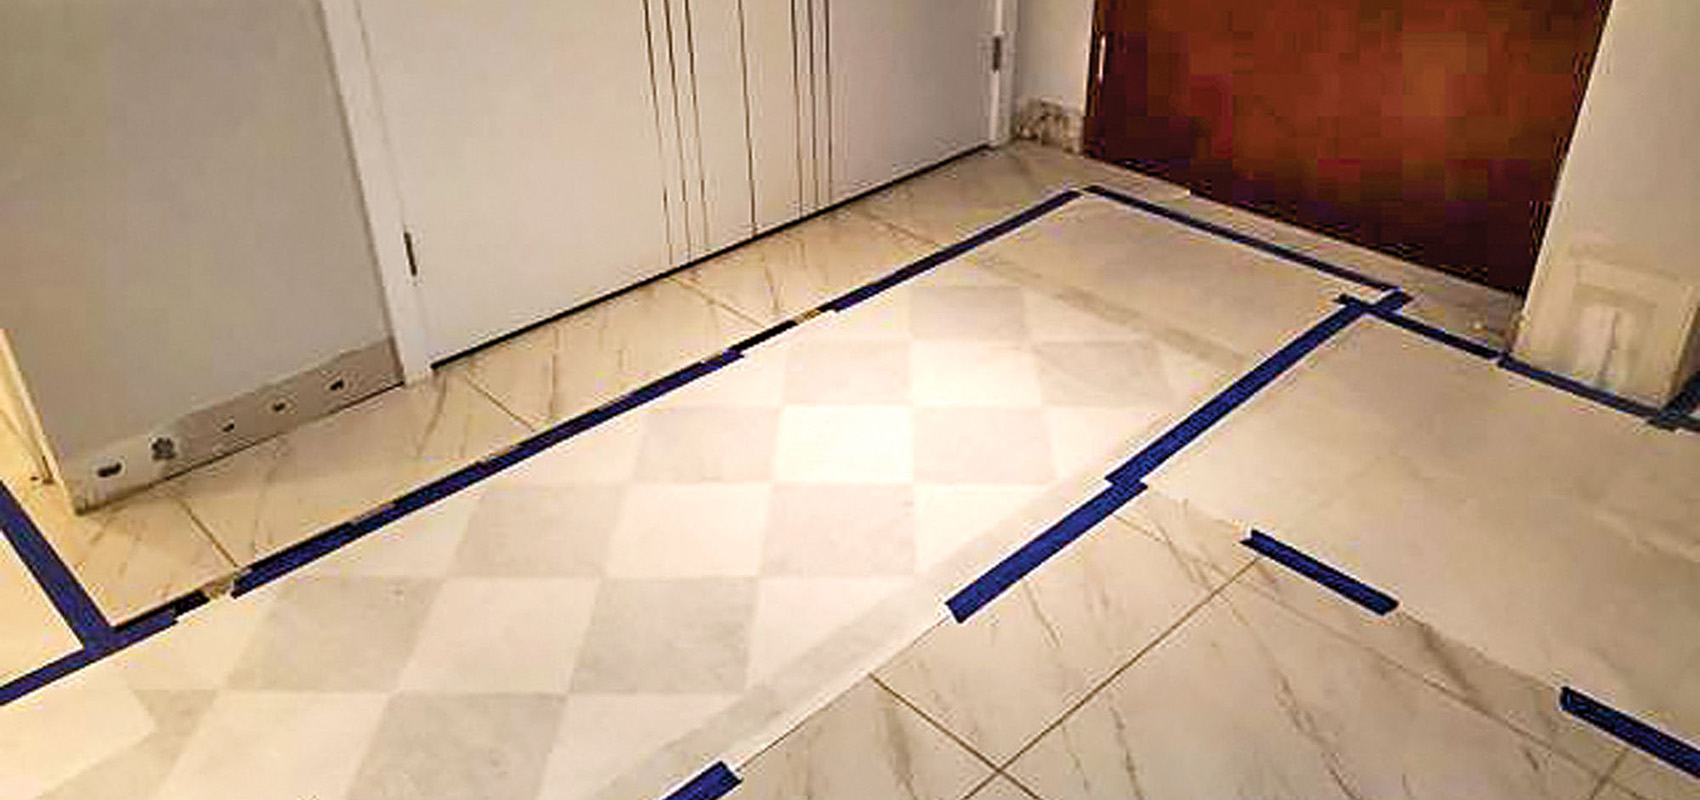 Walking path along a tiled floor during renovation